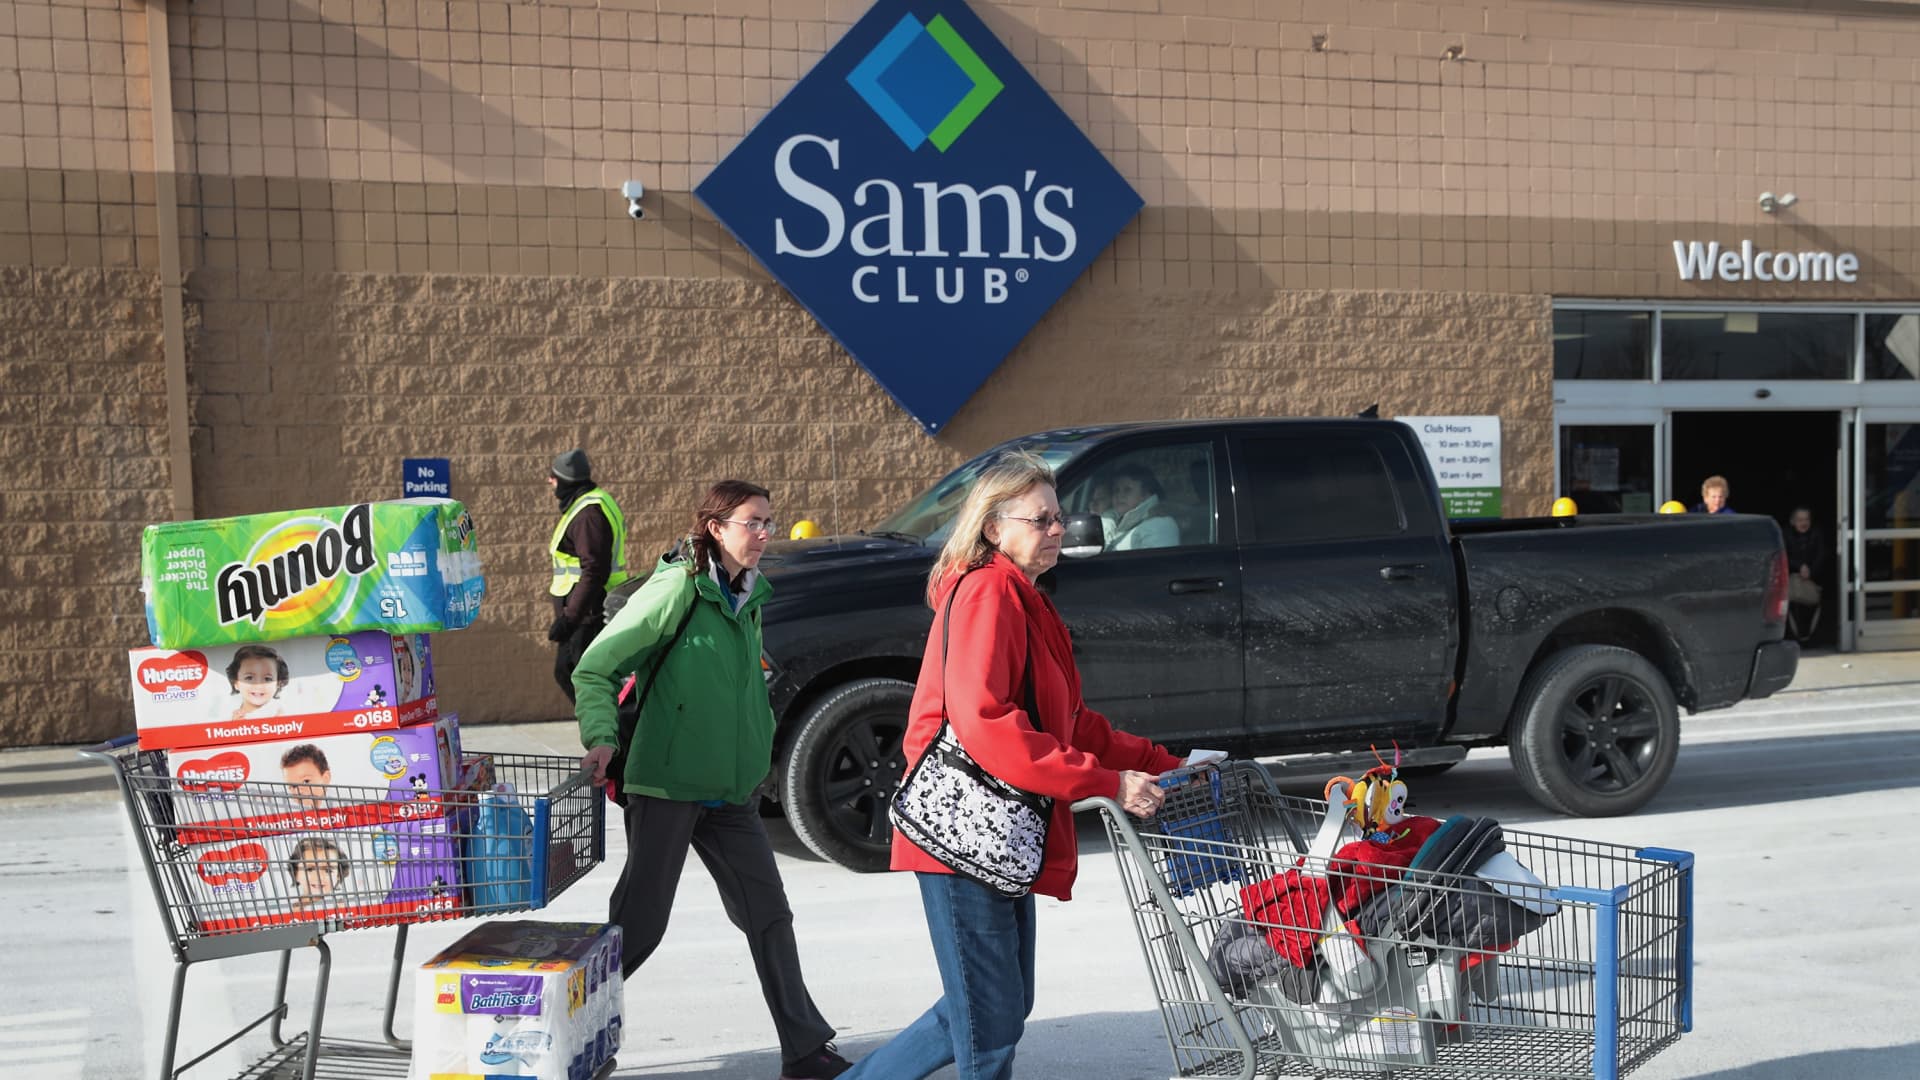 Walmart sues BJ’s Wholesale claiming theft of Sam’s Club self-checkout tech